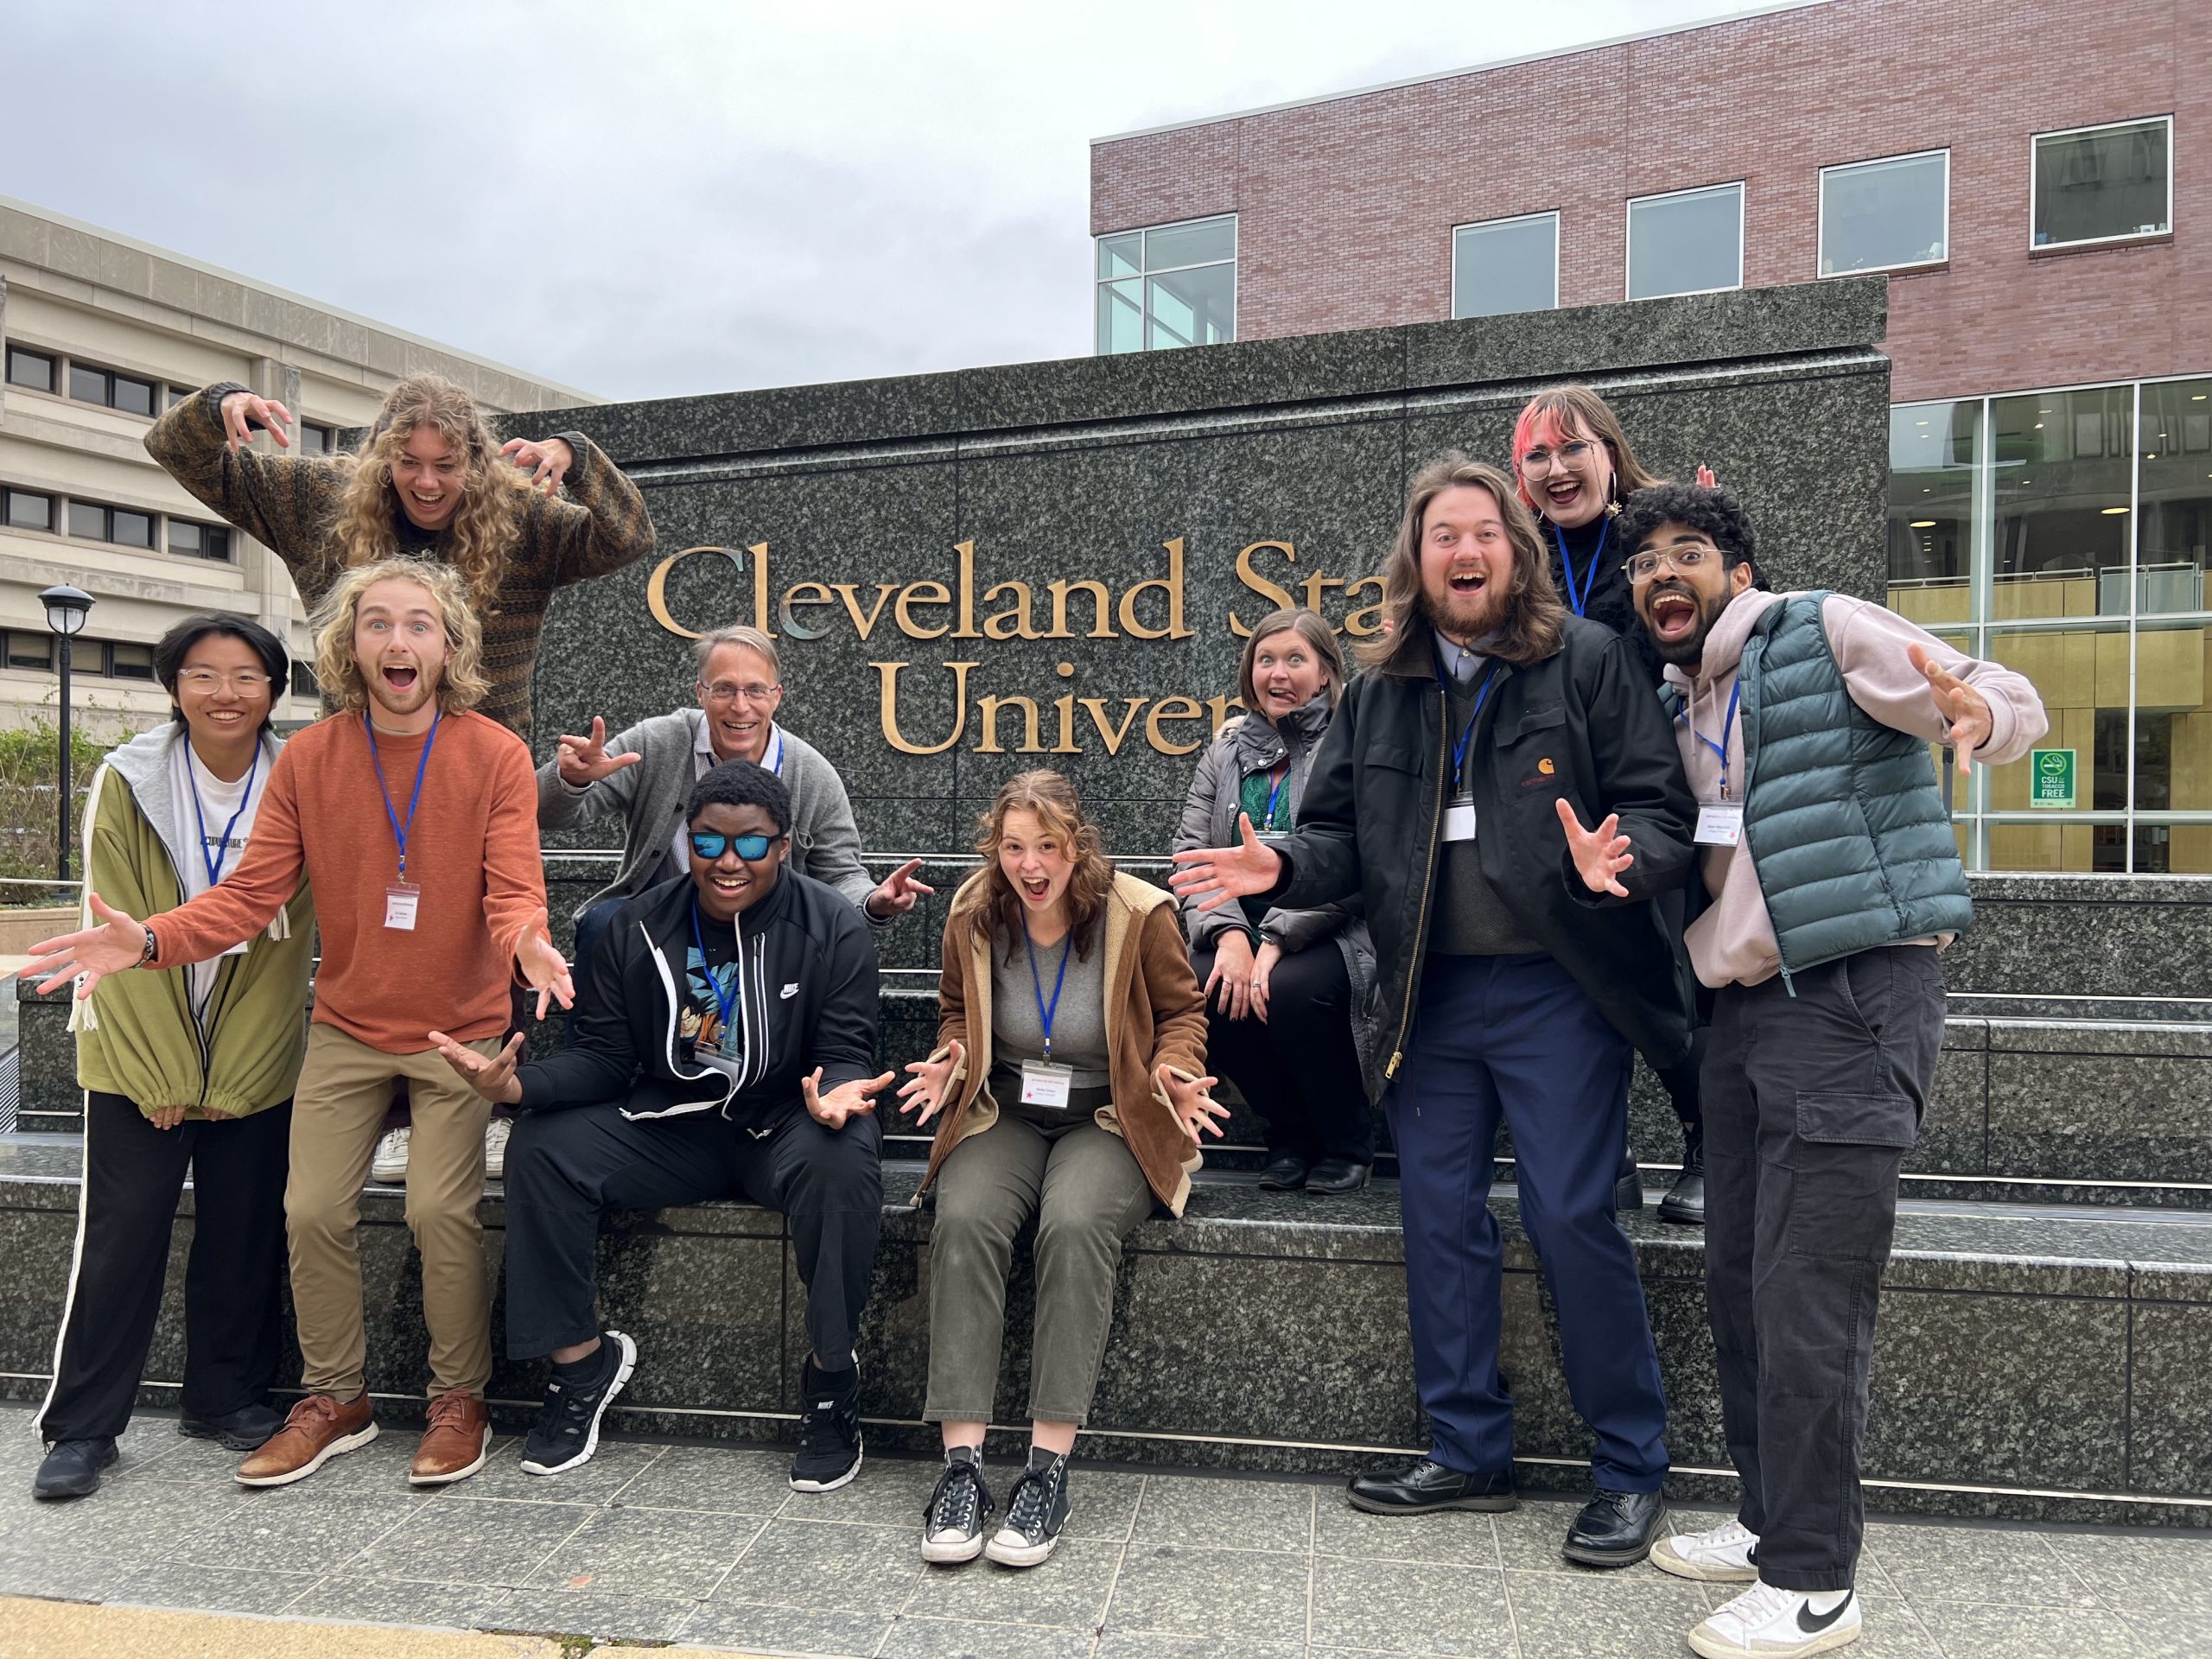 A group of students in front of a sign for Cleveland State University